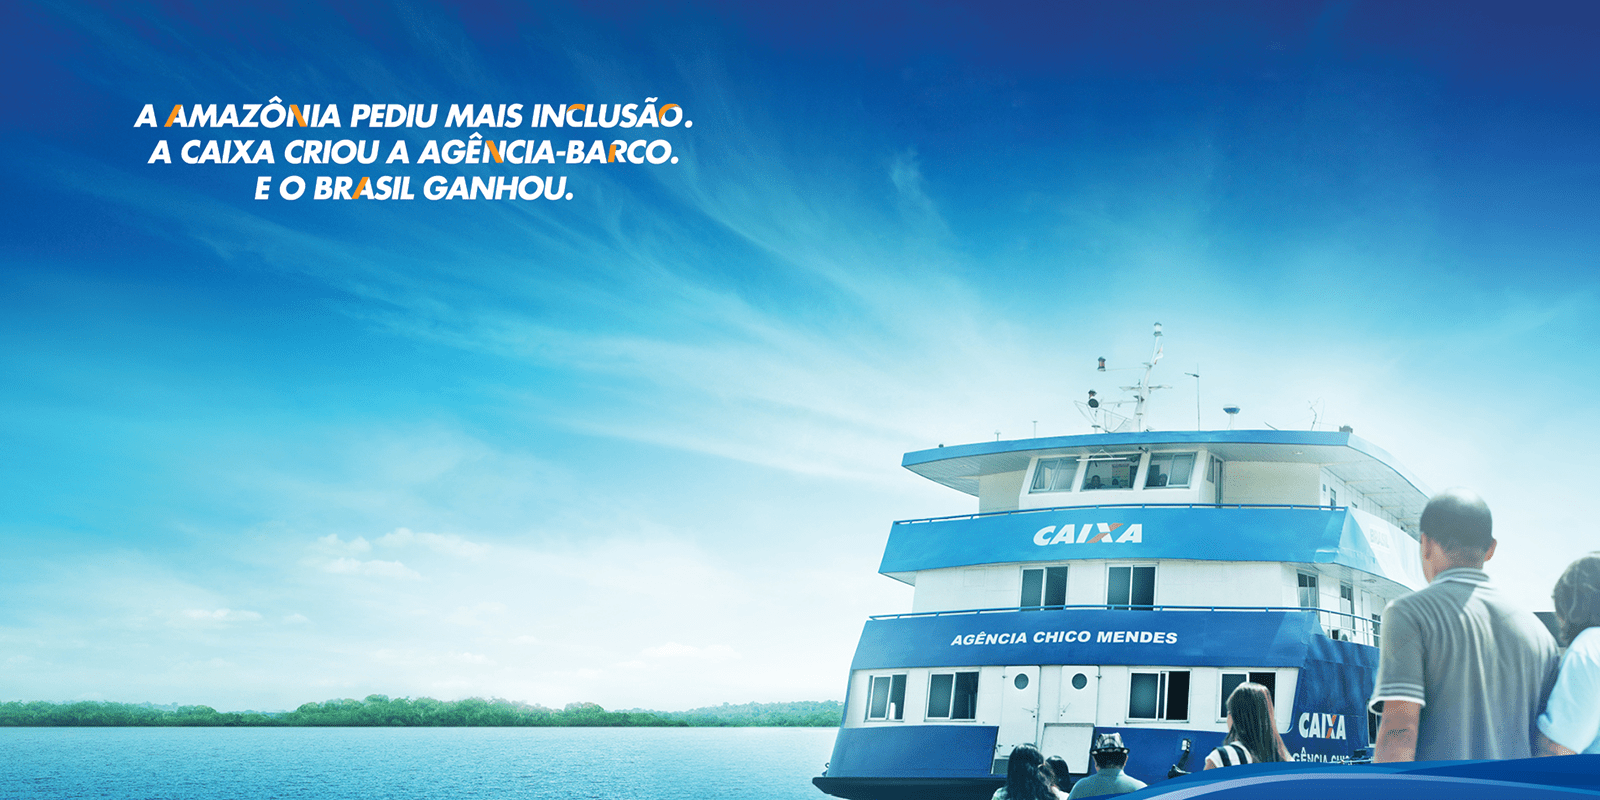 Featured image for “Agência-barco”